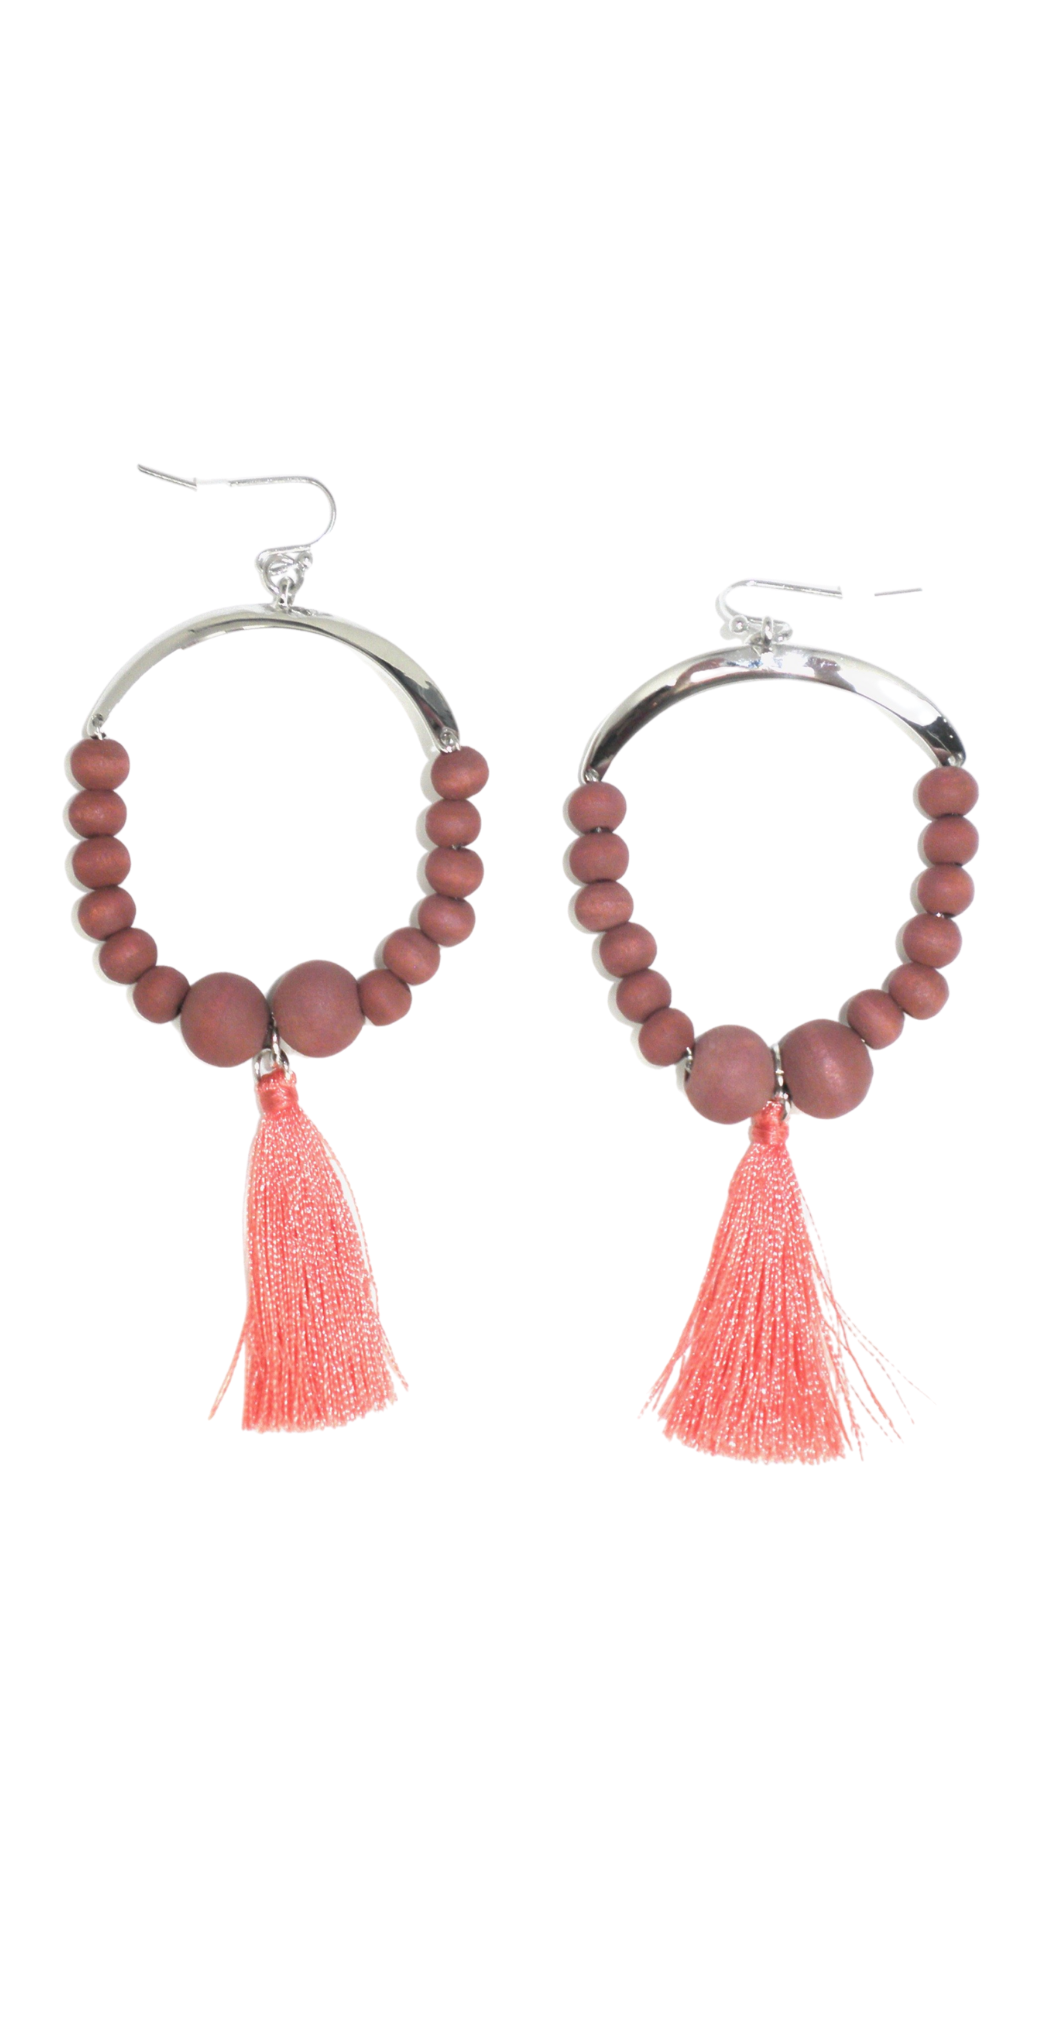 Dangling Earrings with Mauve Beads and Pink Tassel - The Fashion Foundation - {{ discount designer}}